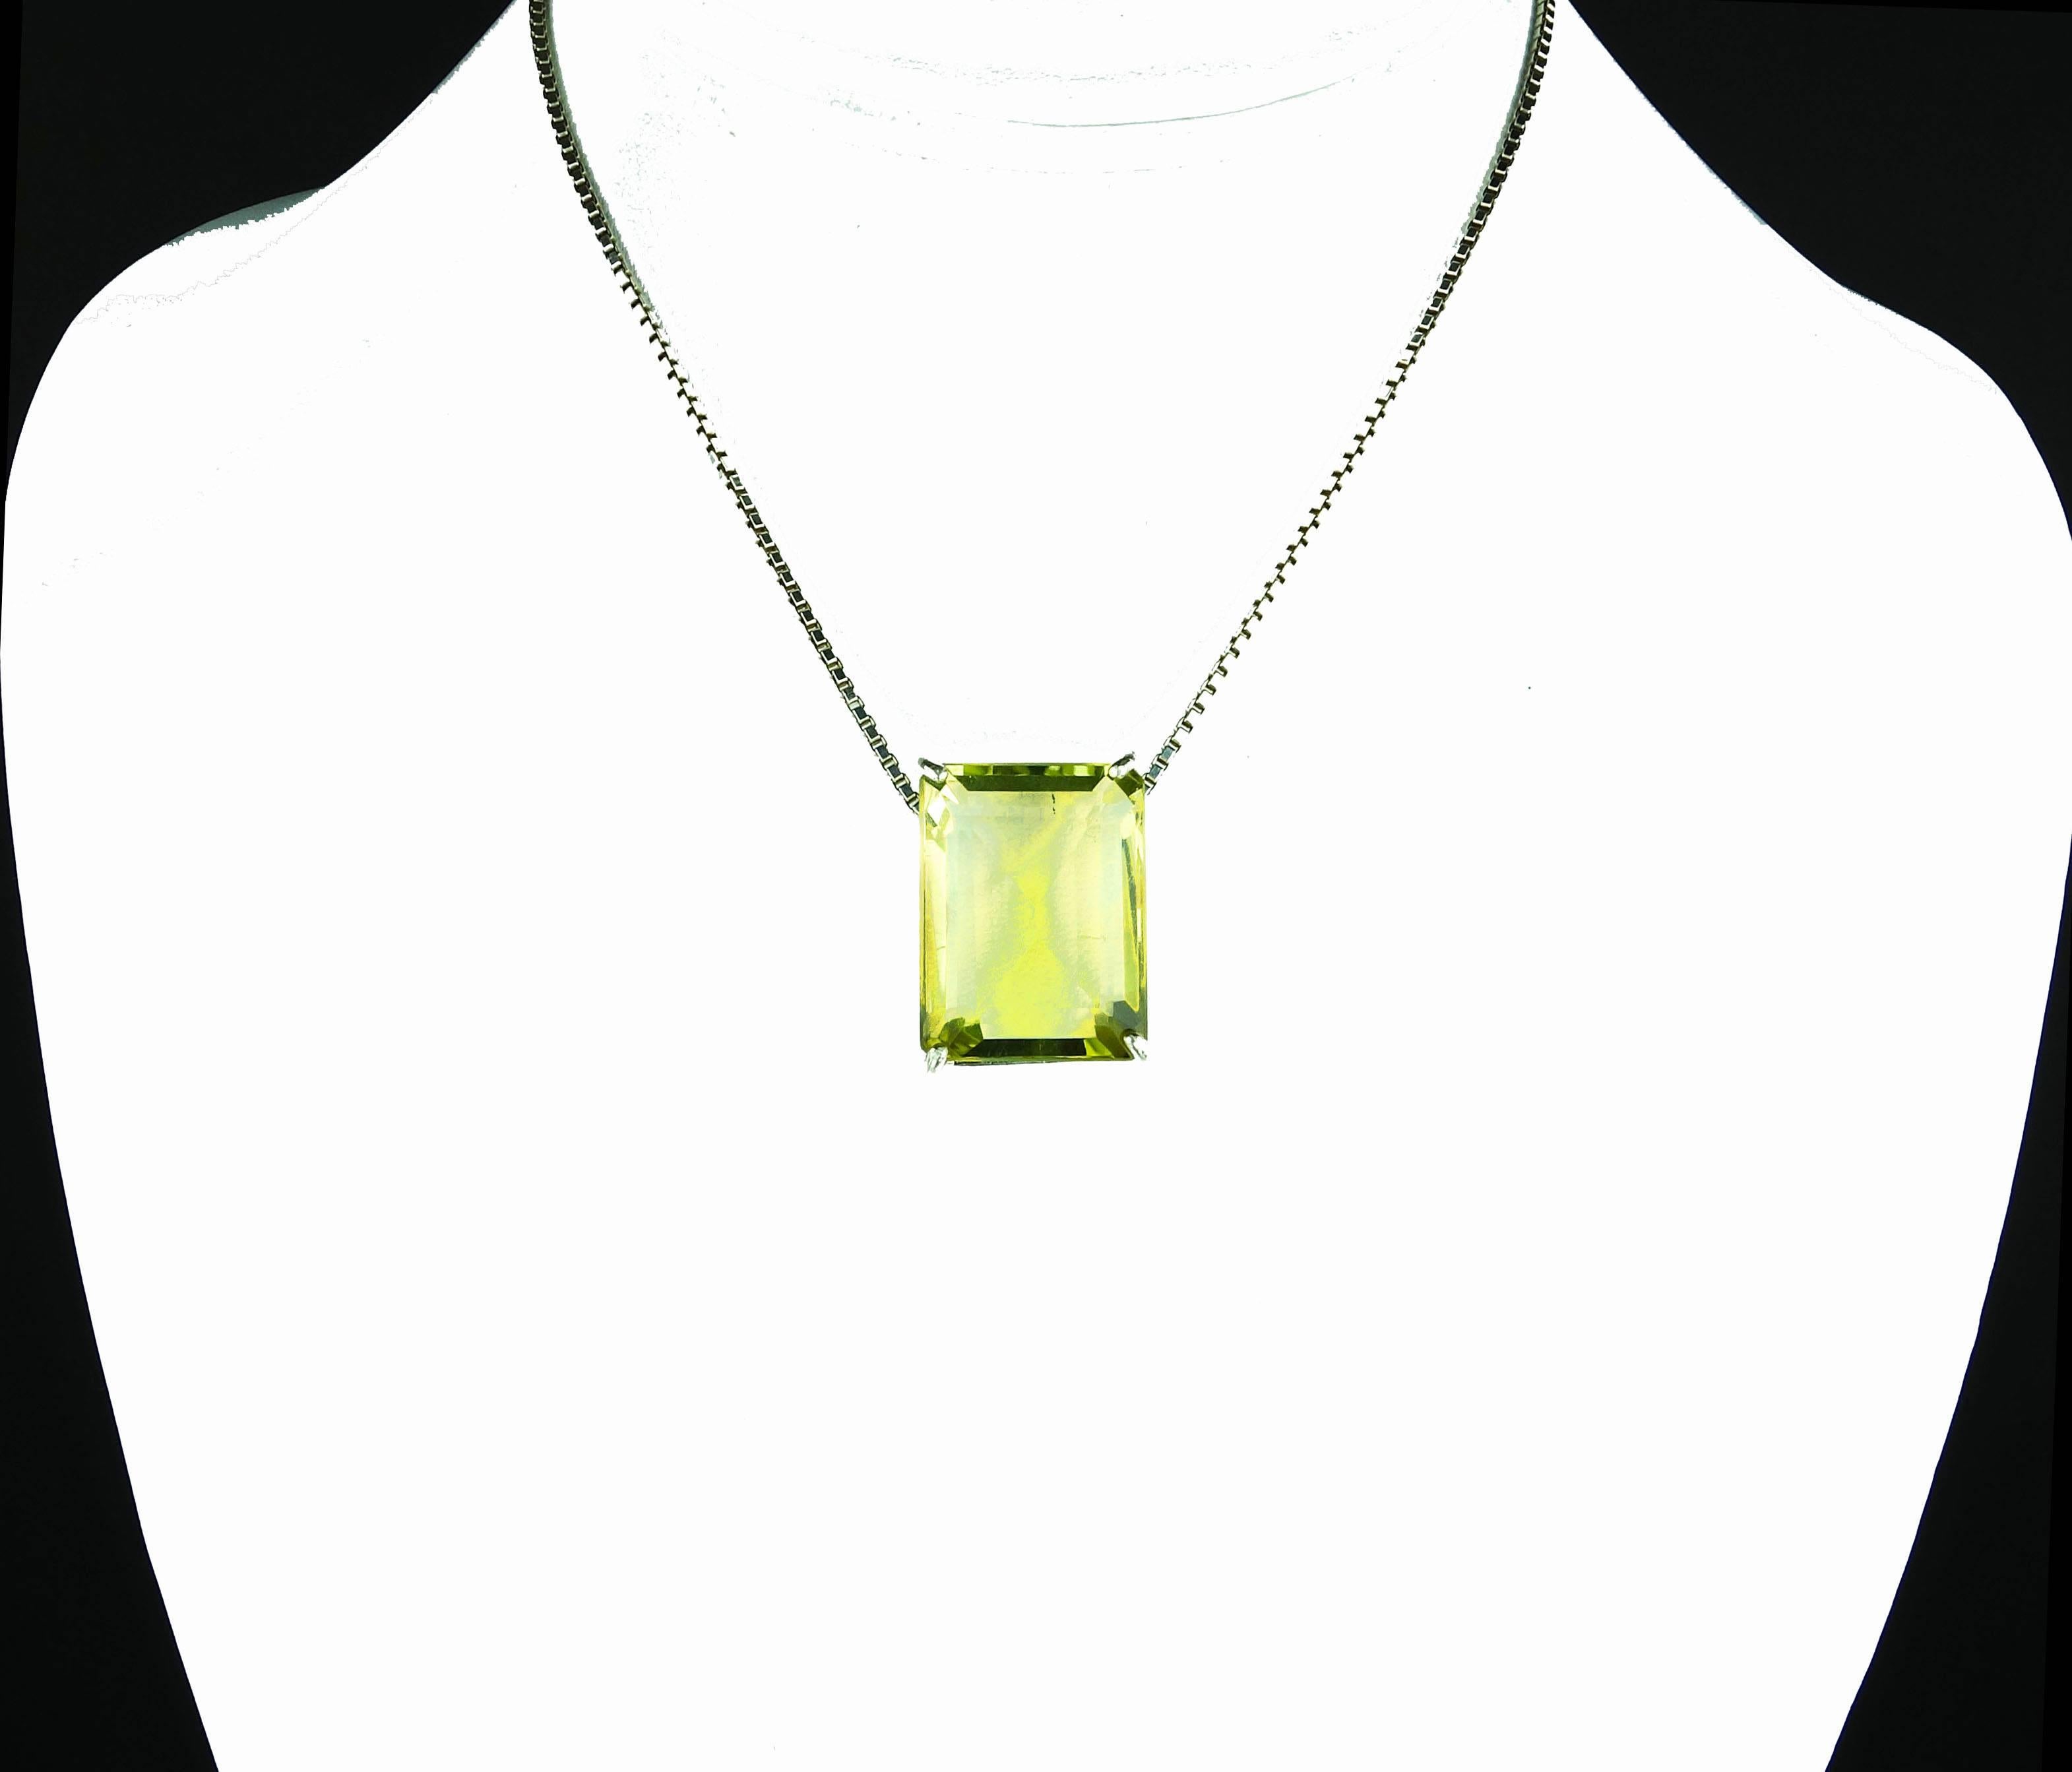 Absolutely clear sparkling 40 carat champagne quartz gemstone set in a sterling silver pendant.  The gemstone measures 17.9 mm x 23.5 mm and is clear and clean.